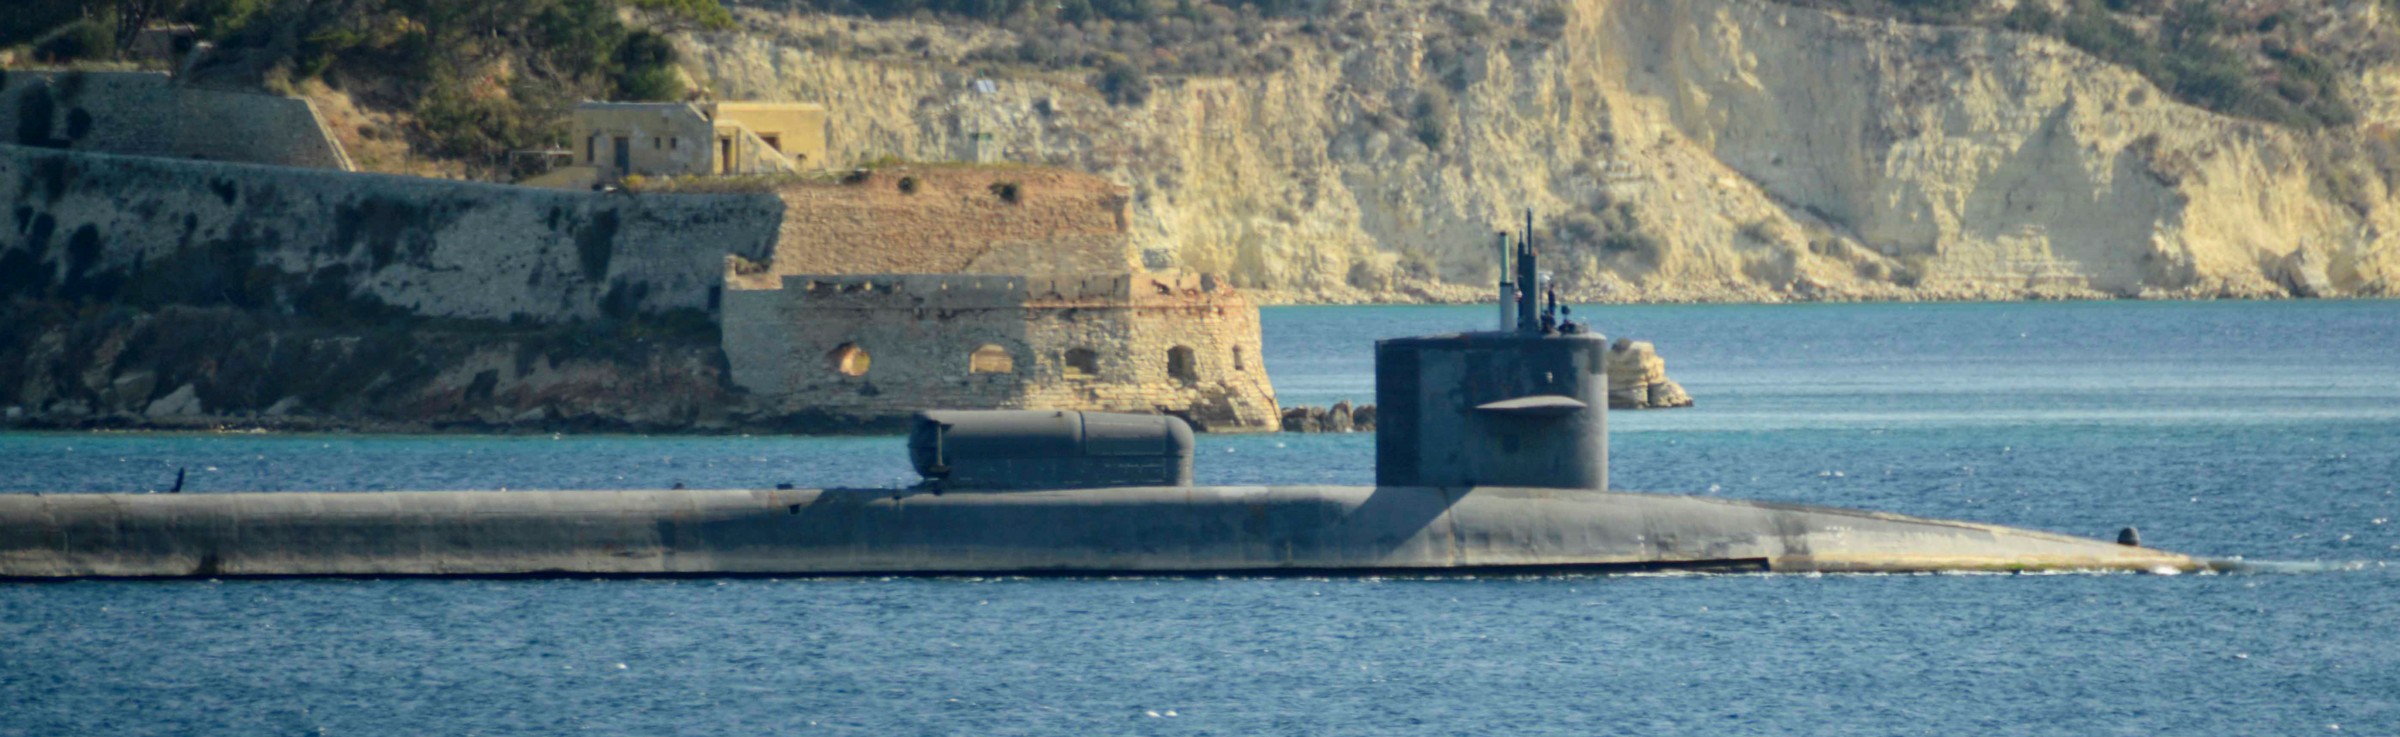 ssgn-728 uss florida guided missile submarine us navy 2016 02 souda bay crete greece